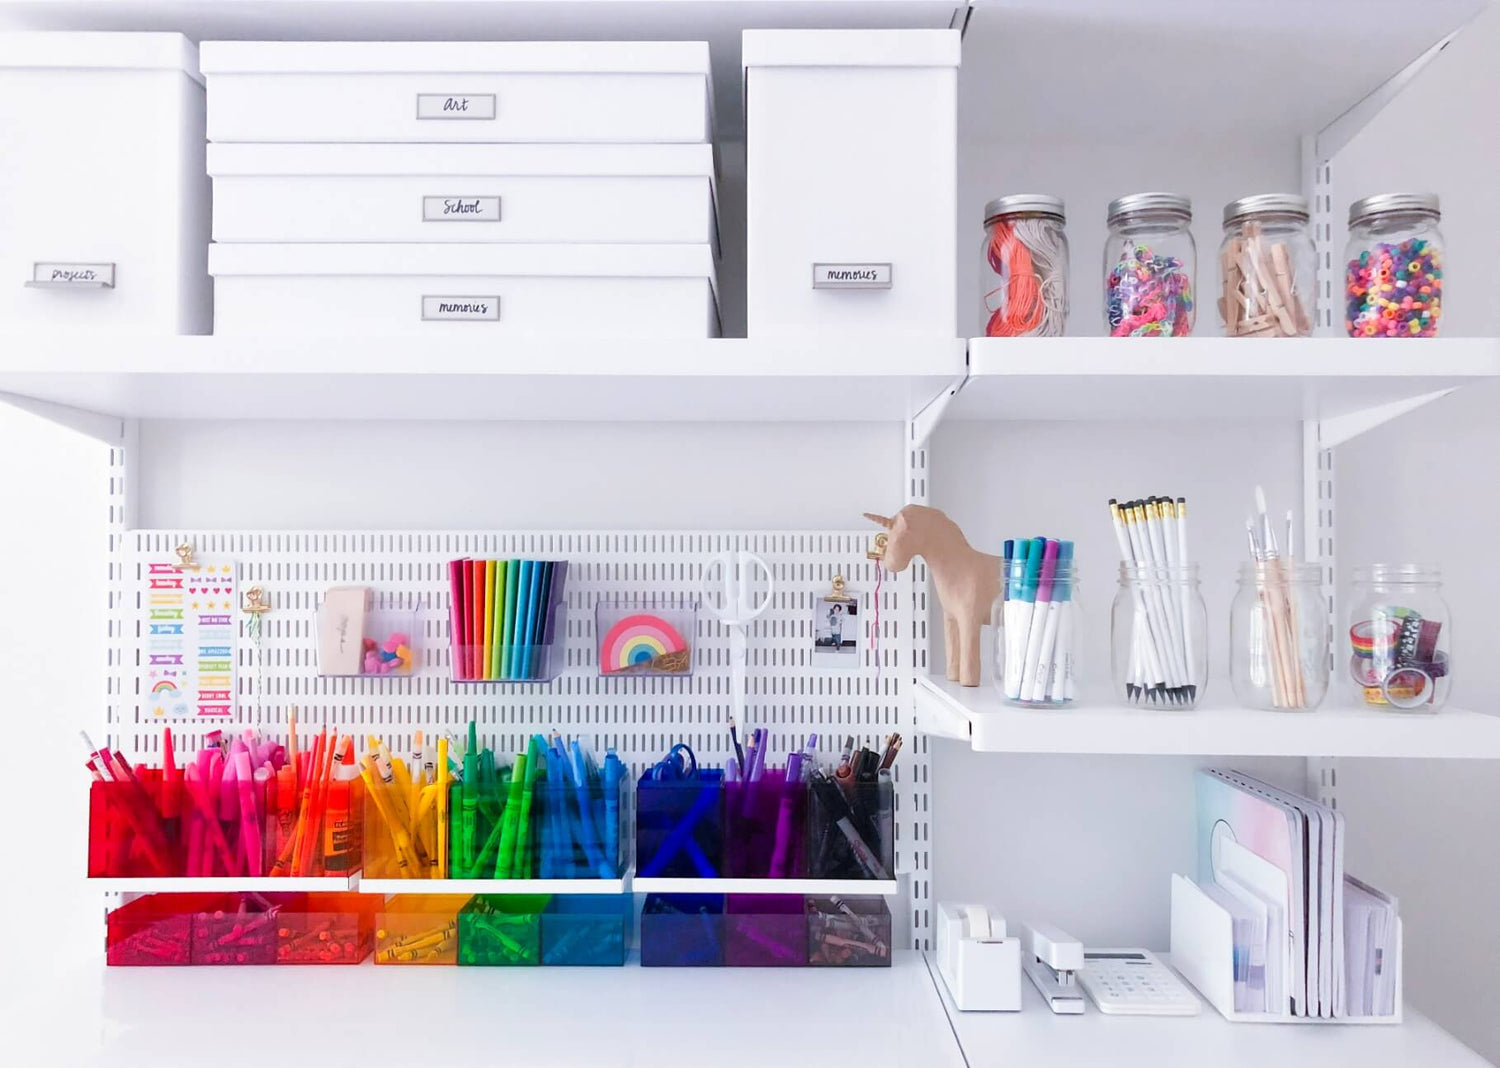 10 tips we learned from The Home Edit about organization - Blog